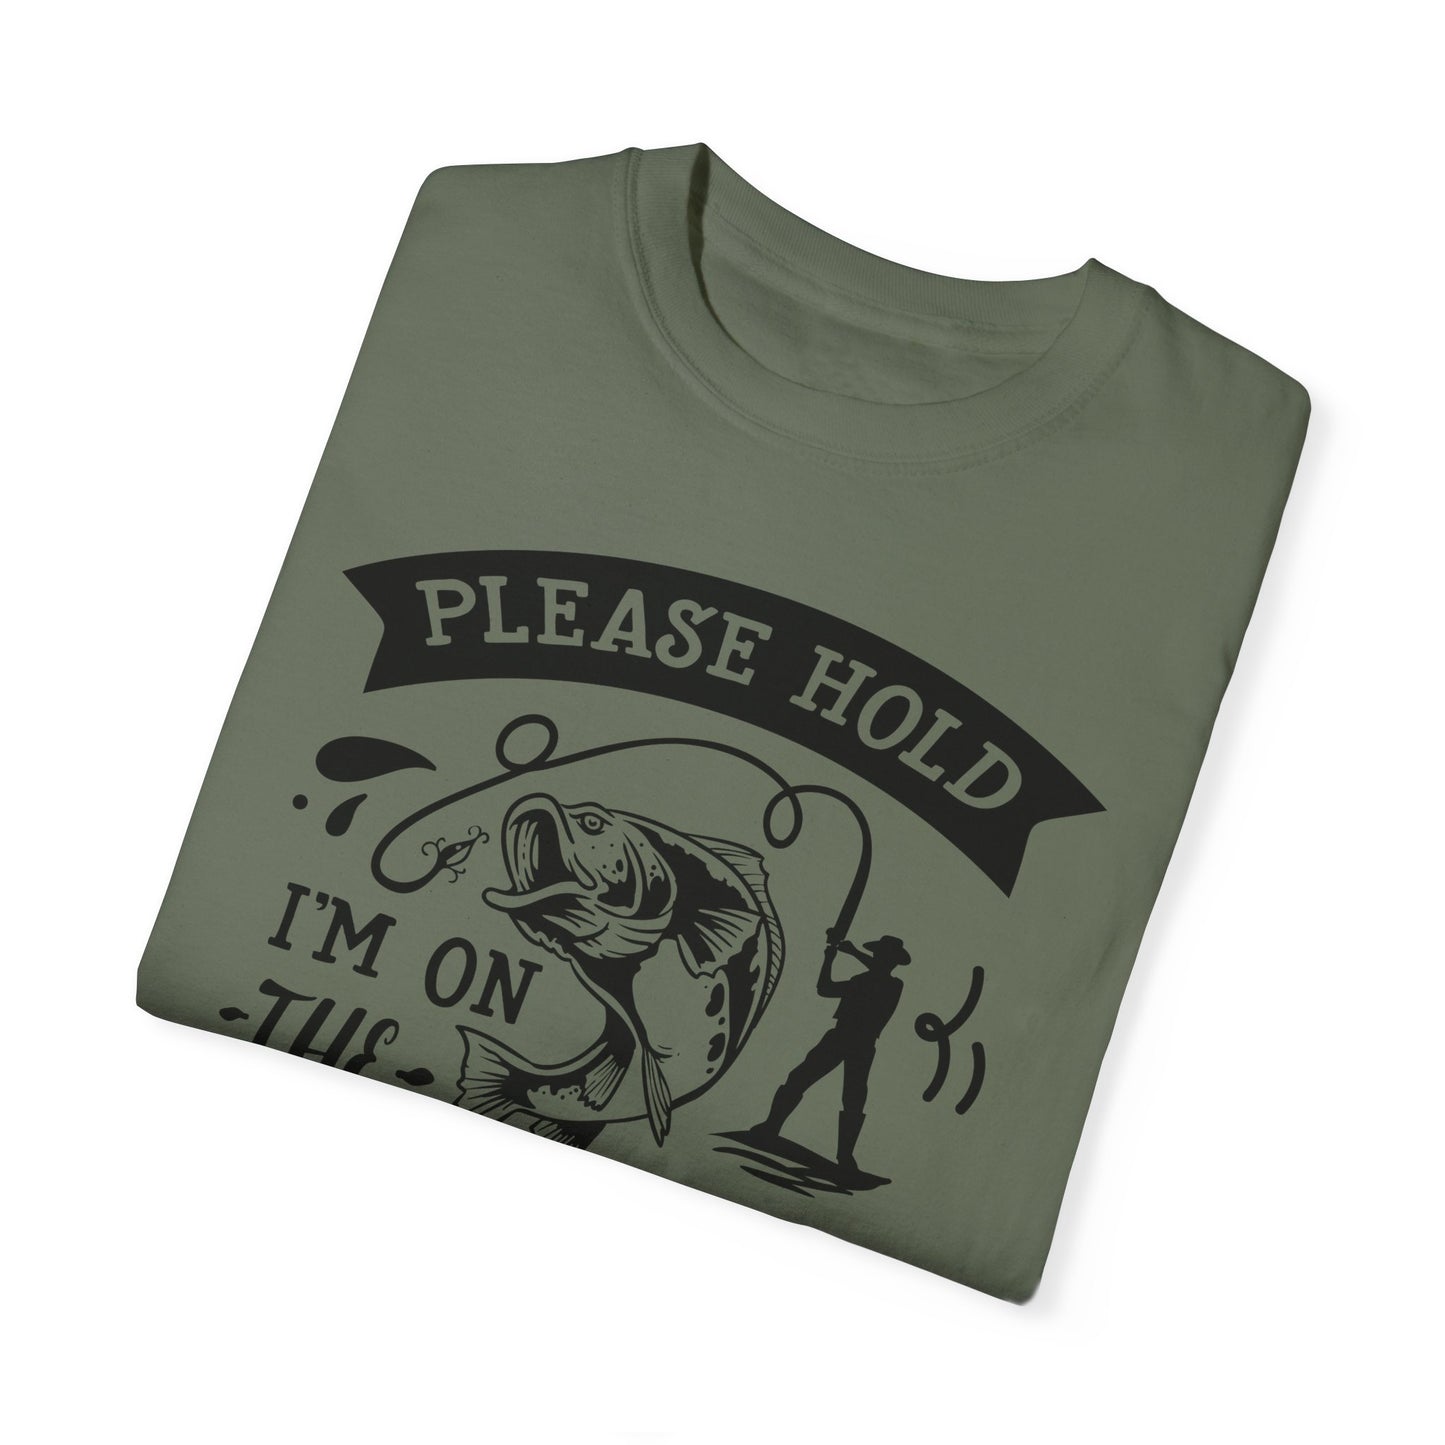 Please hold I'm on another line: Unisex Garment-Dyed T-shirt